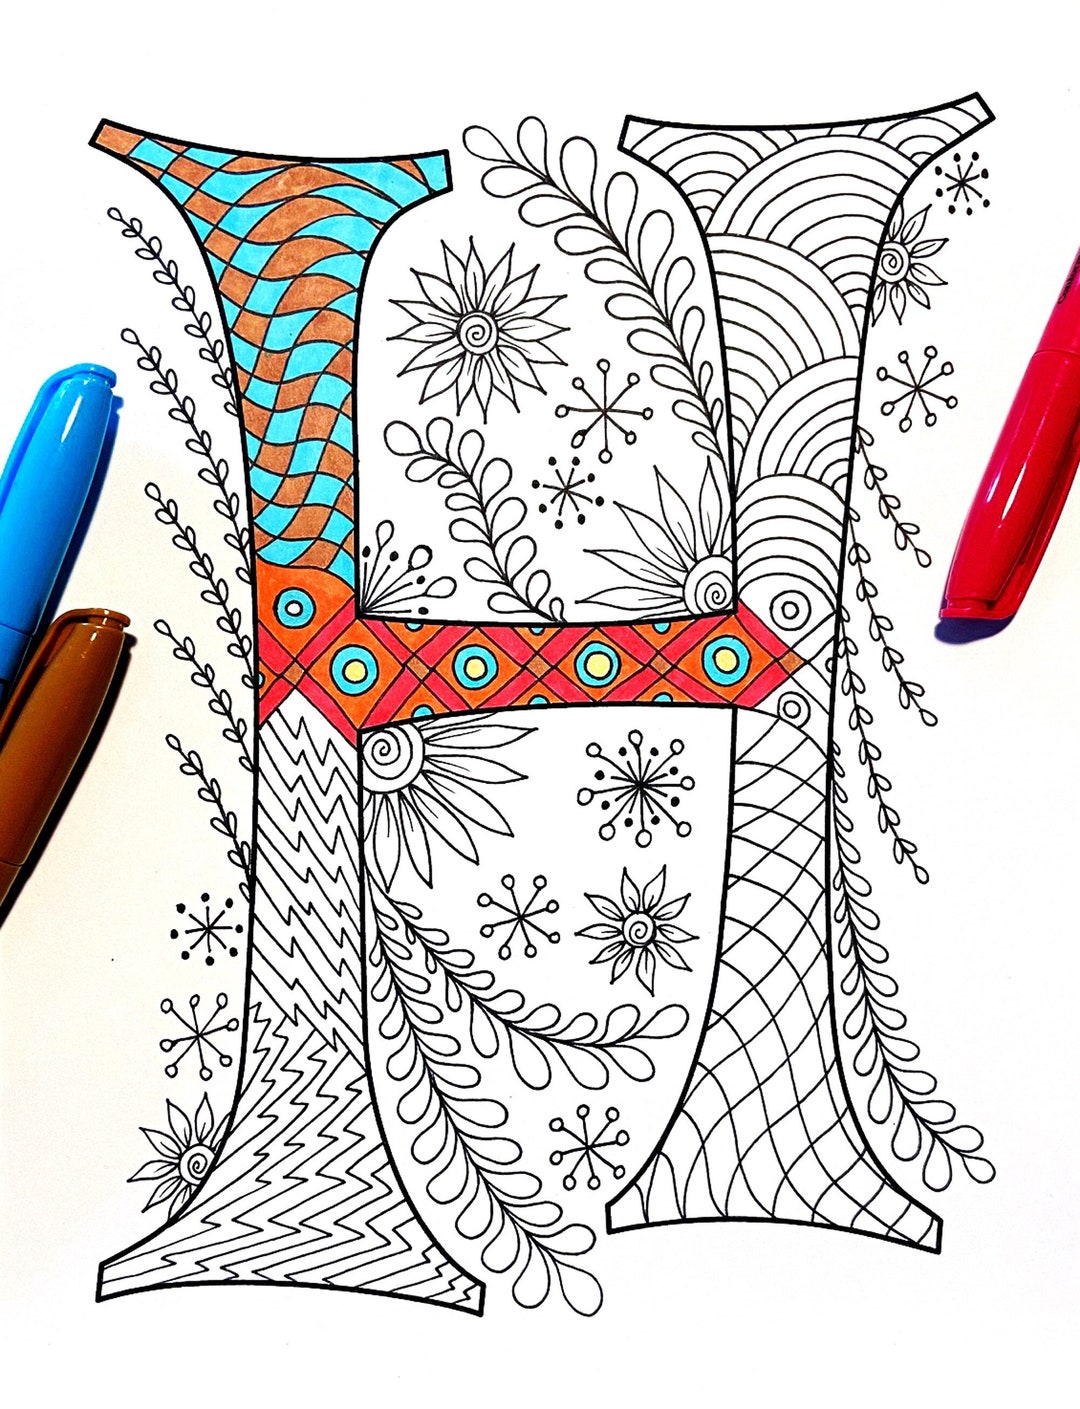 Retro Floral Letter H Coloring Page Inspired by the Font - Etsy